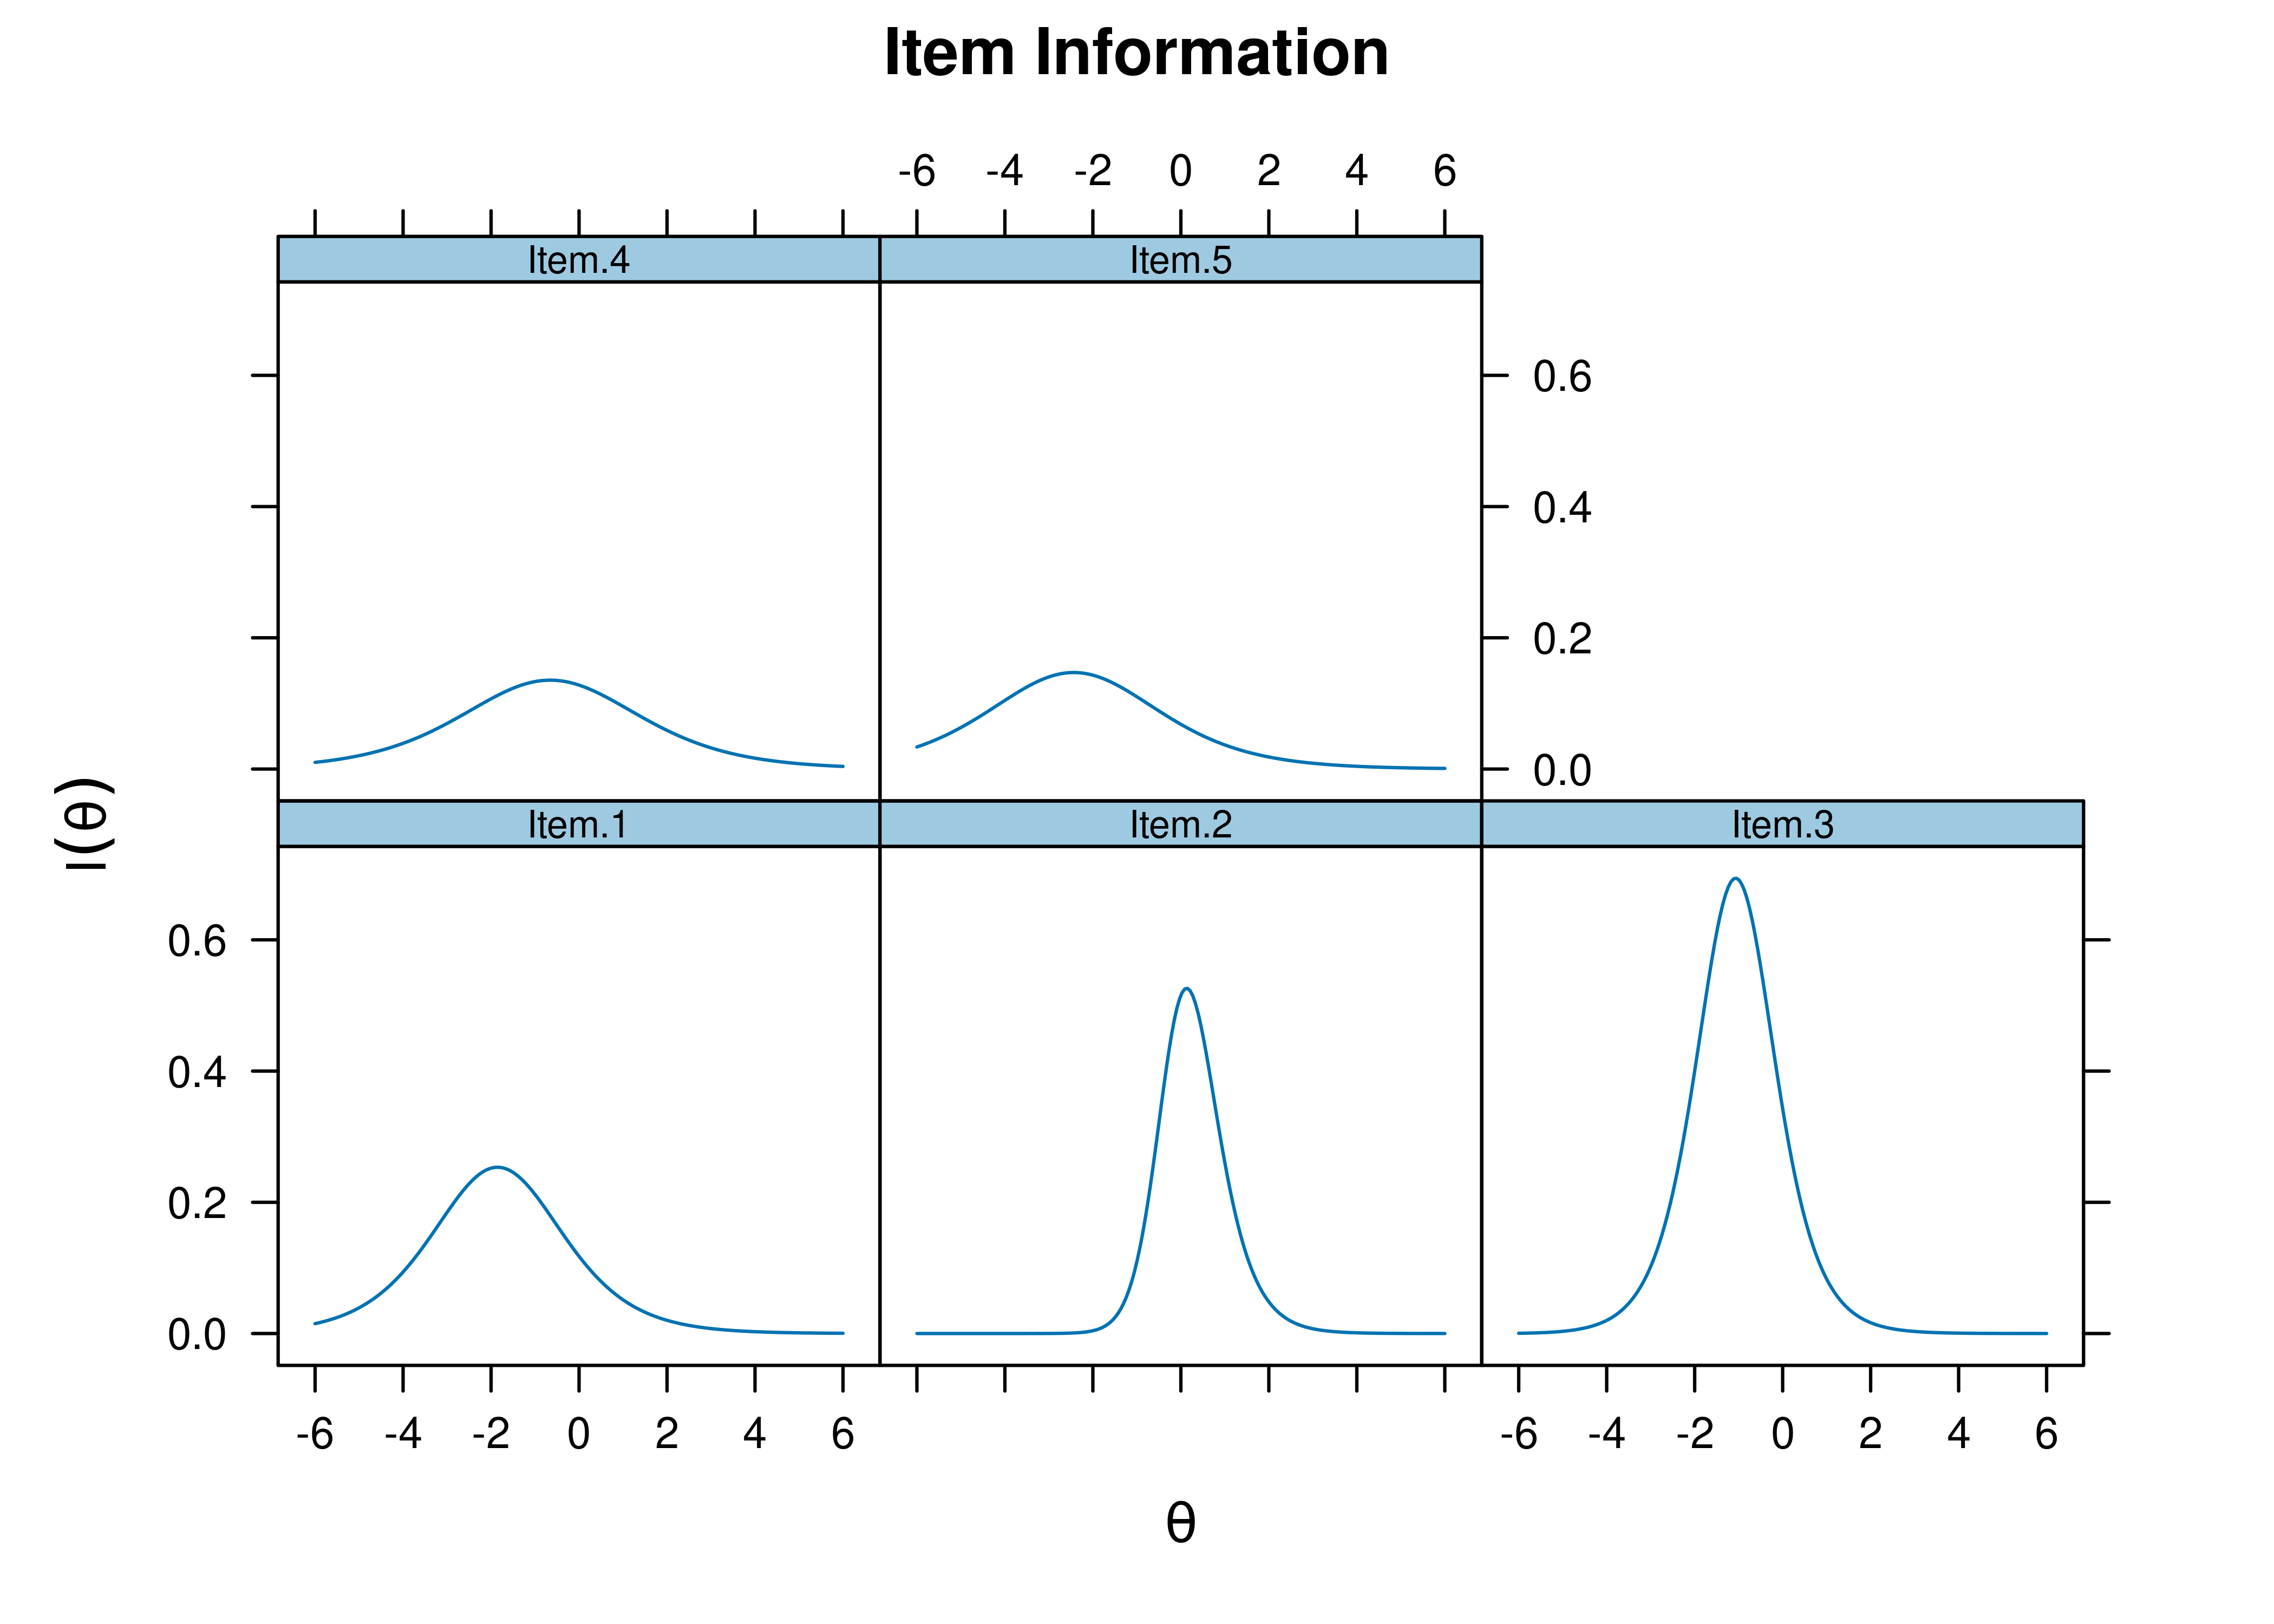 Item Information Curves From Three-Parameter Logistic Item Response Theory Model.